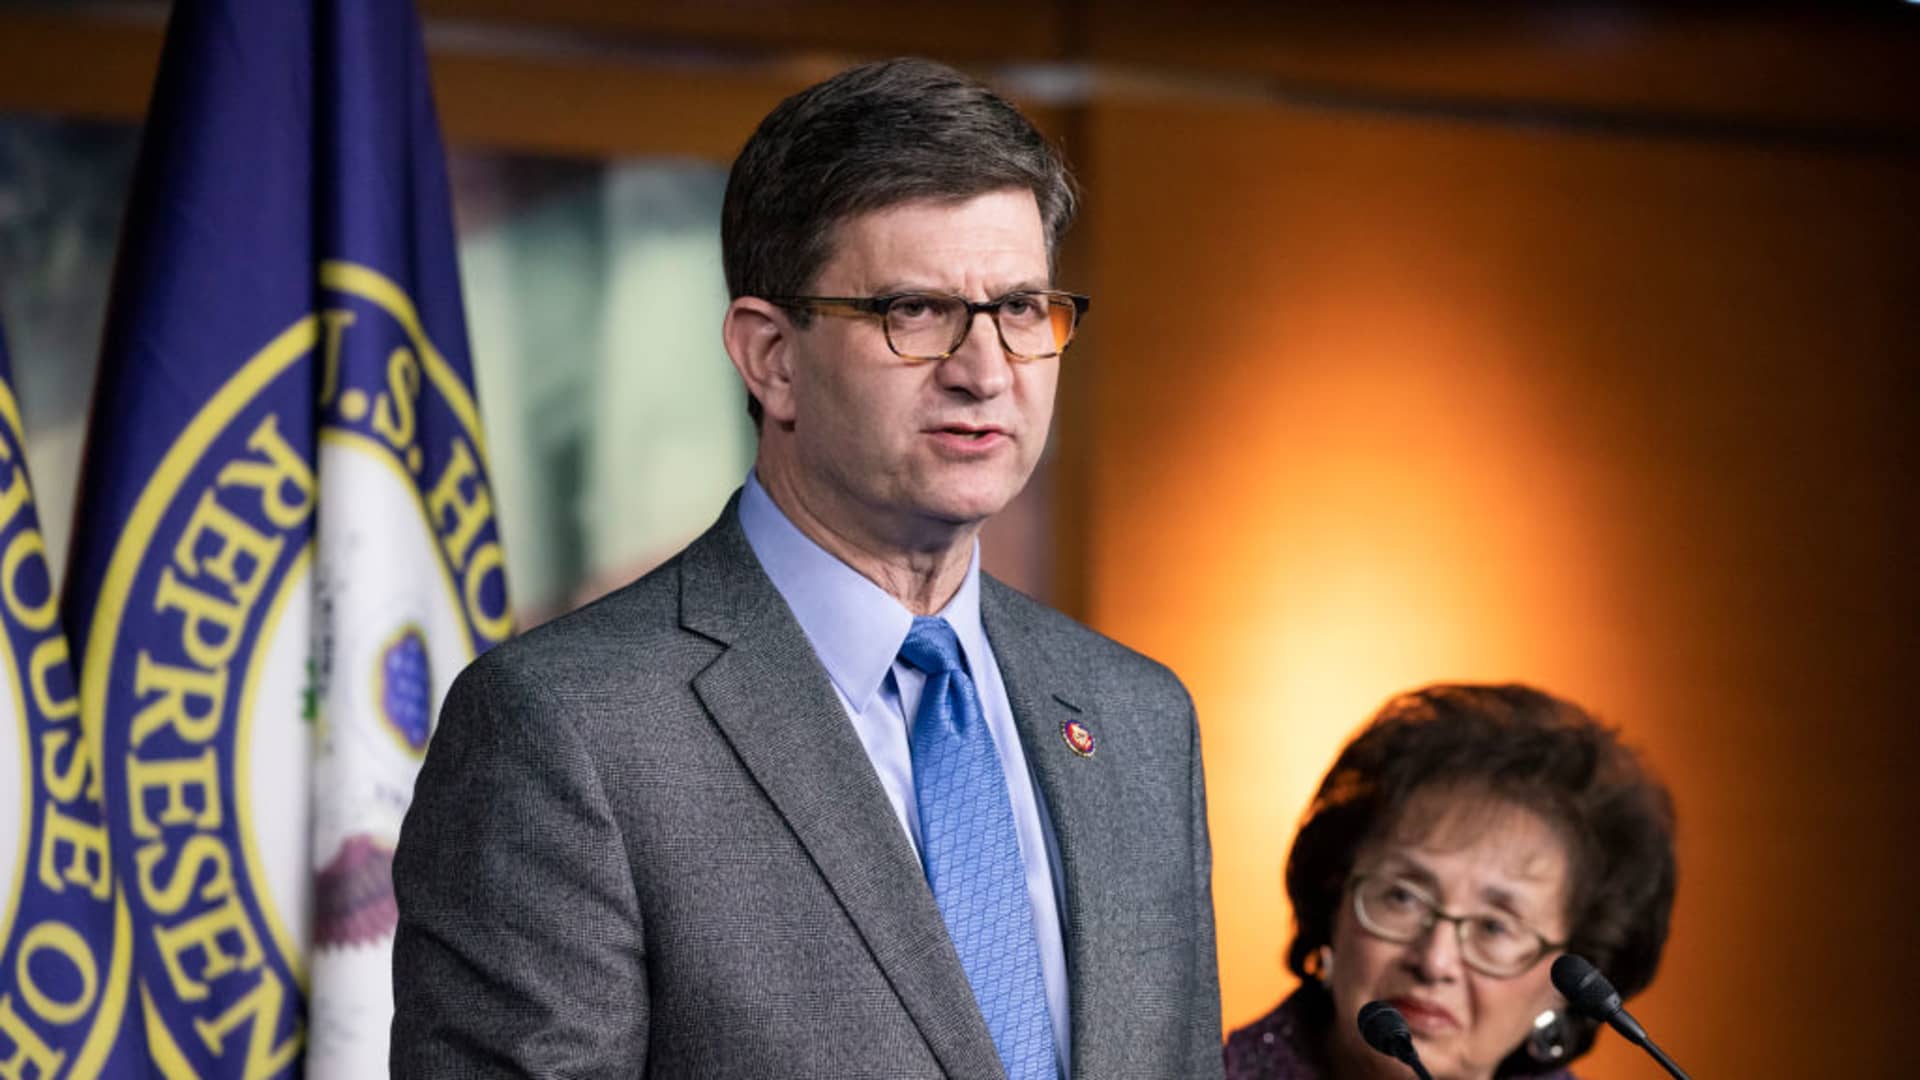 Representative Brad Schneider (D-IL) speaks about his experiences during a trip to Israel and Auschwitz-Birkenau as part of a bipartisan delegation from the House of Representatives while Representative Nita Lowey (D-NY) listens on January 28, 2020 in Washington, DC.